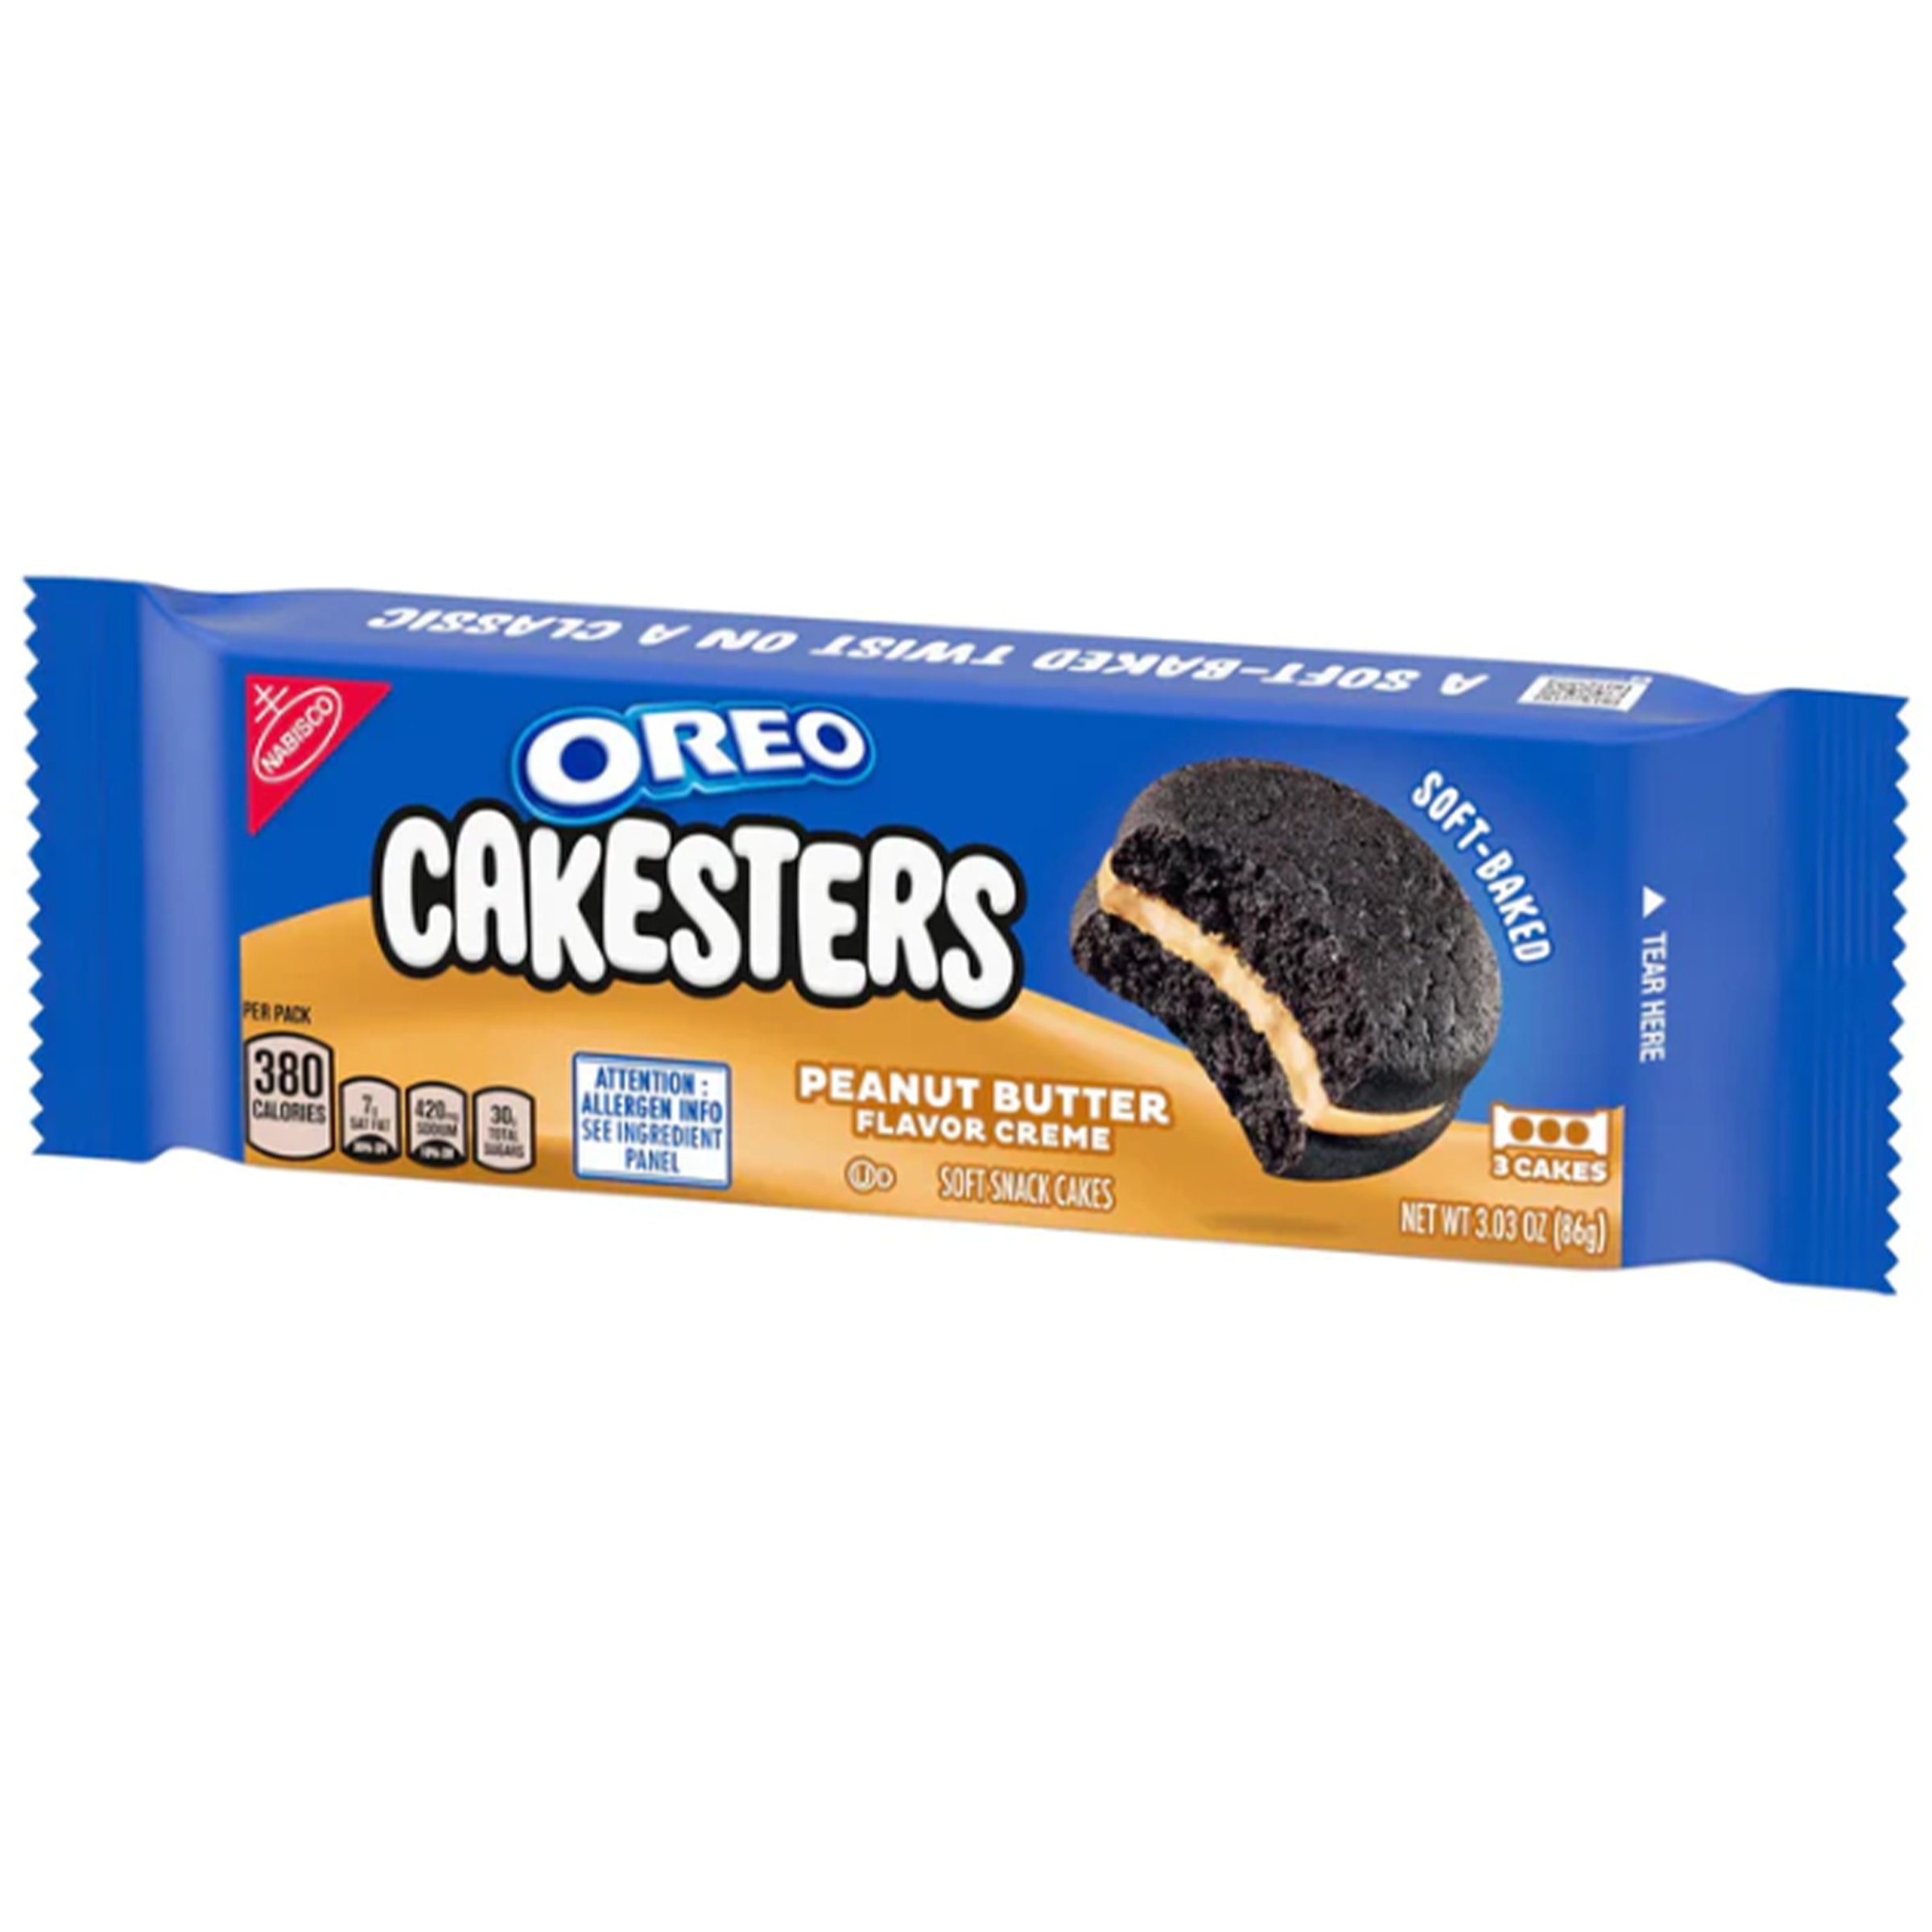 Oreo Cakesters Peanut Butter (Share Pack)